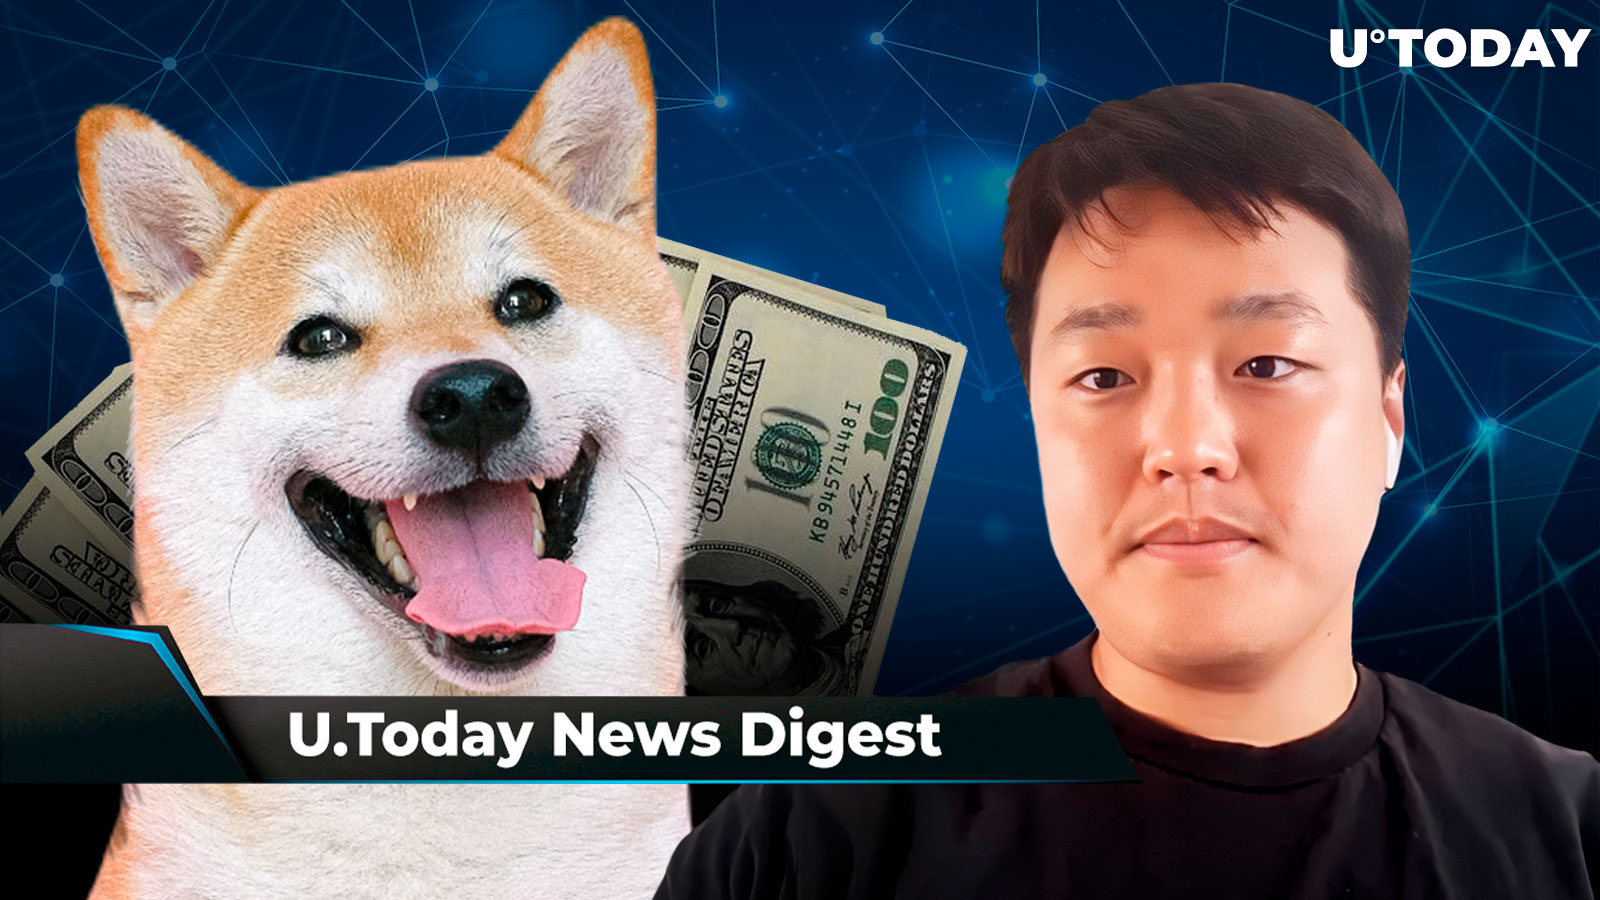 SHIB Adds Zero to Its Price, Do Kwon Cashed $80 Million in Terra’s Crypto Monthly, Cardano Creator Calls Bear Markets “Comfortable”: Crypto News Digest by U.Today